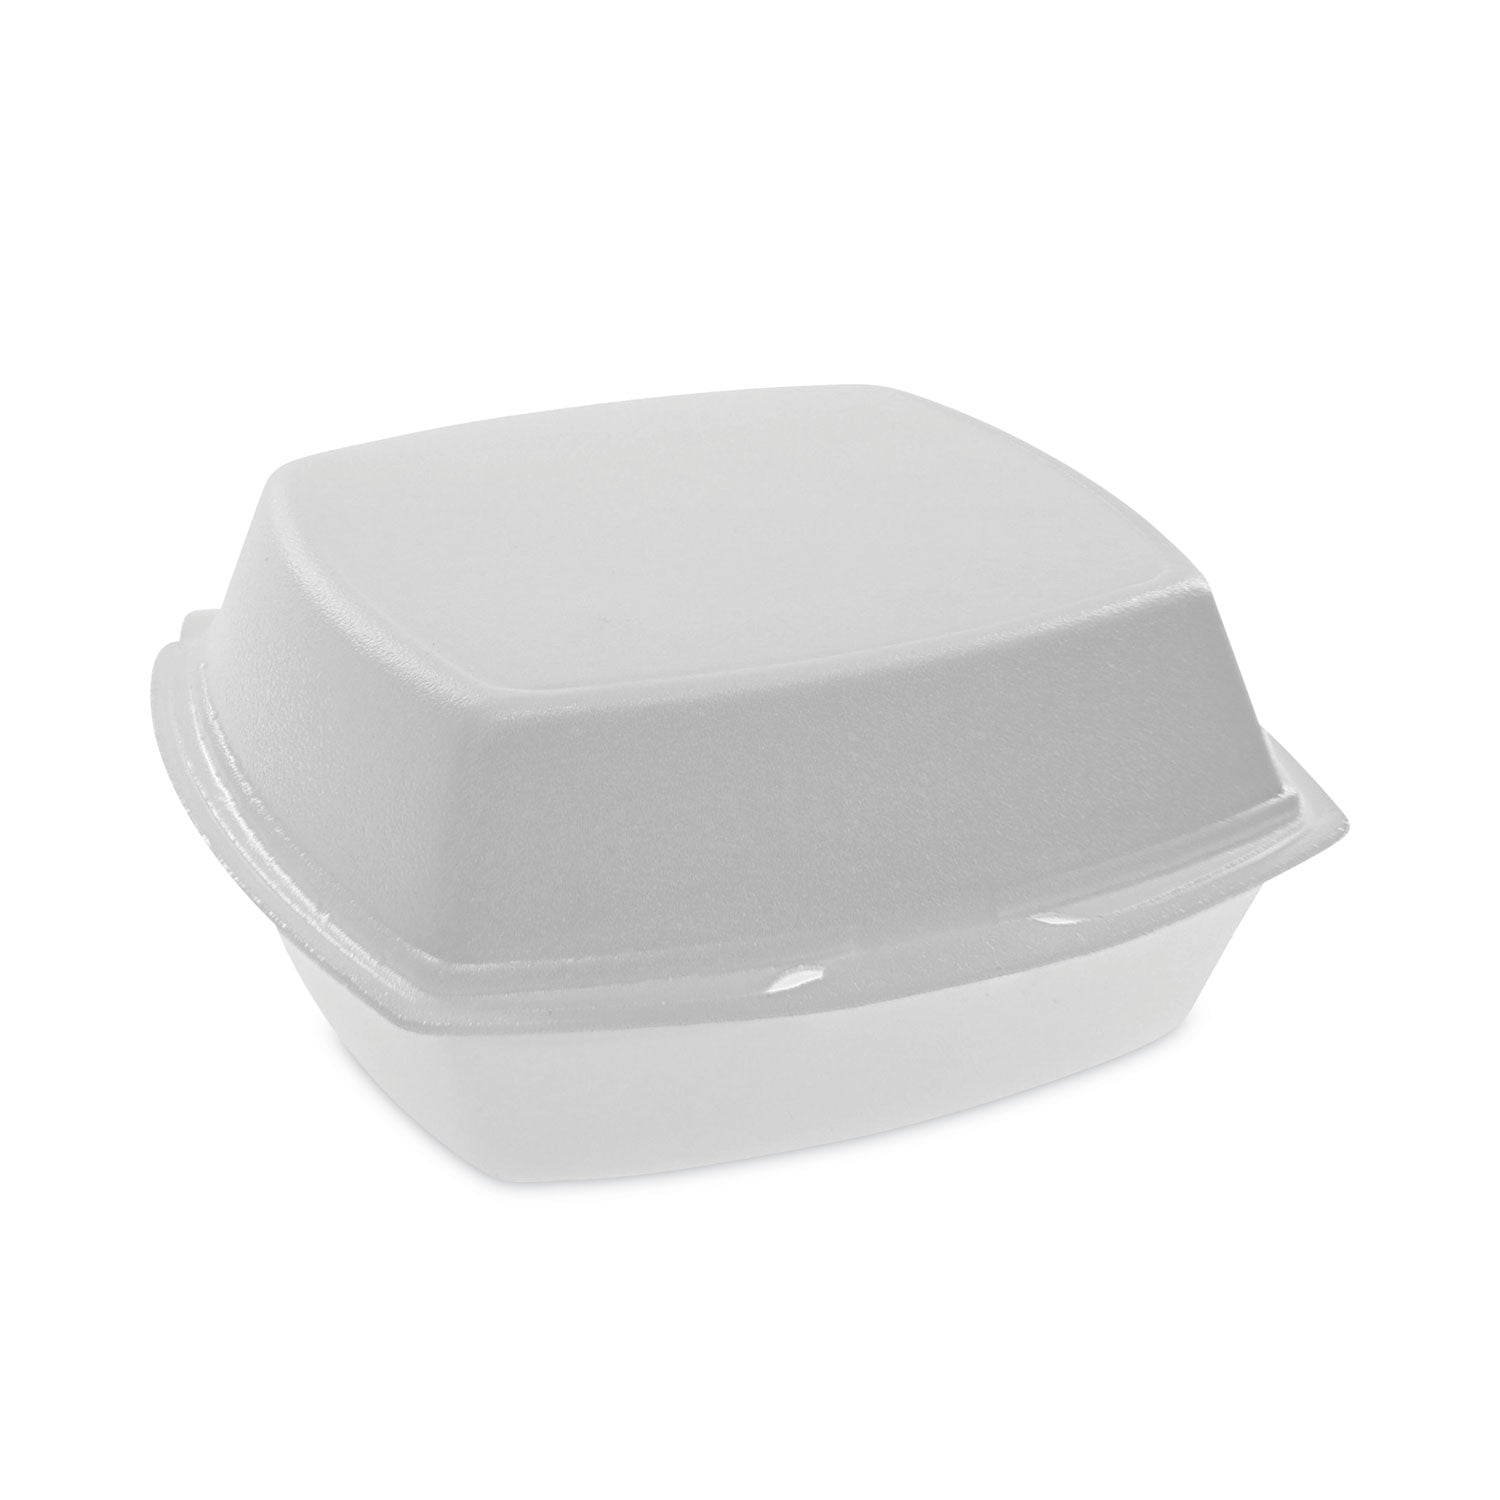 foam-hinged-lid-container-single-tab-lock-638-x-638-x-3-white-500-carton_pctyth100800000 - 1